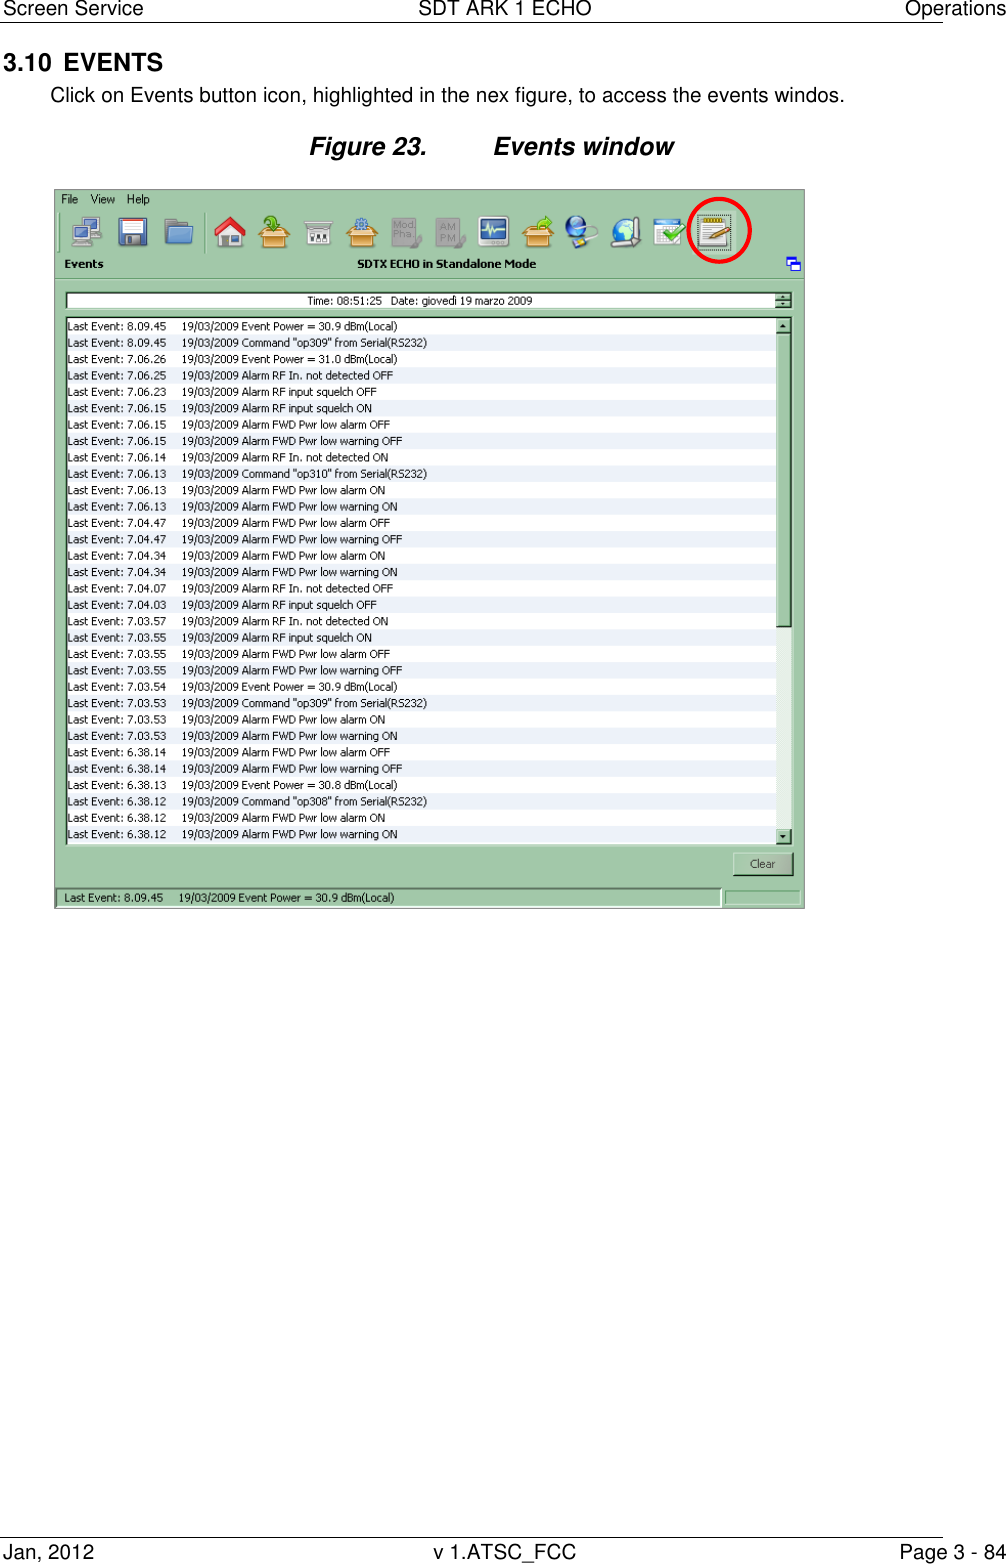 Screen Service  SDT ARK 1 ECHO  Operations Jan, 2012  v 1.ATSC_FCC  Page 3 - 84 3.10  EVENTS Click on Events button icon, highlighted in the nex figure, to access the events windos. Figure 23.  Events window                            